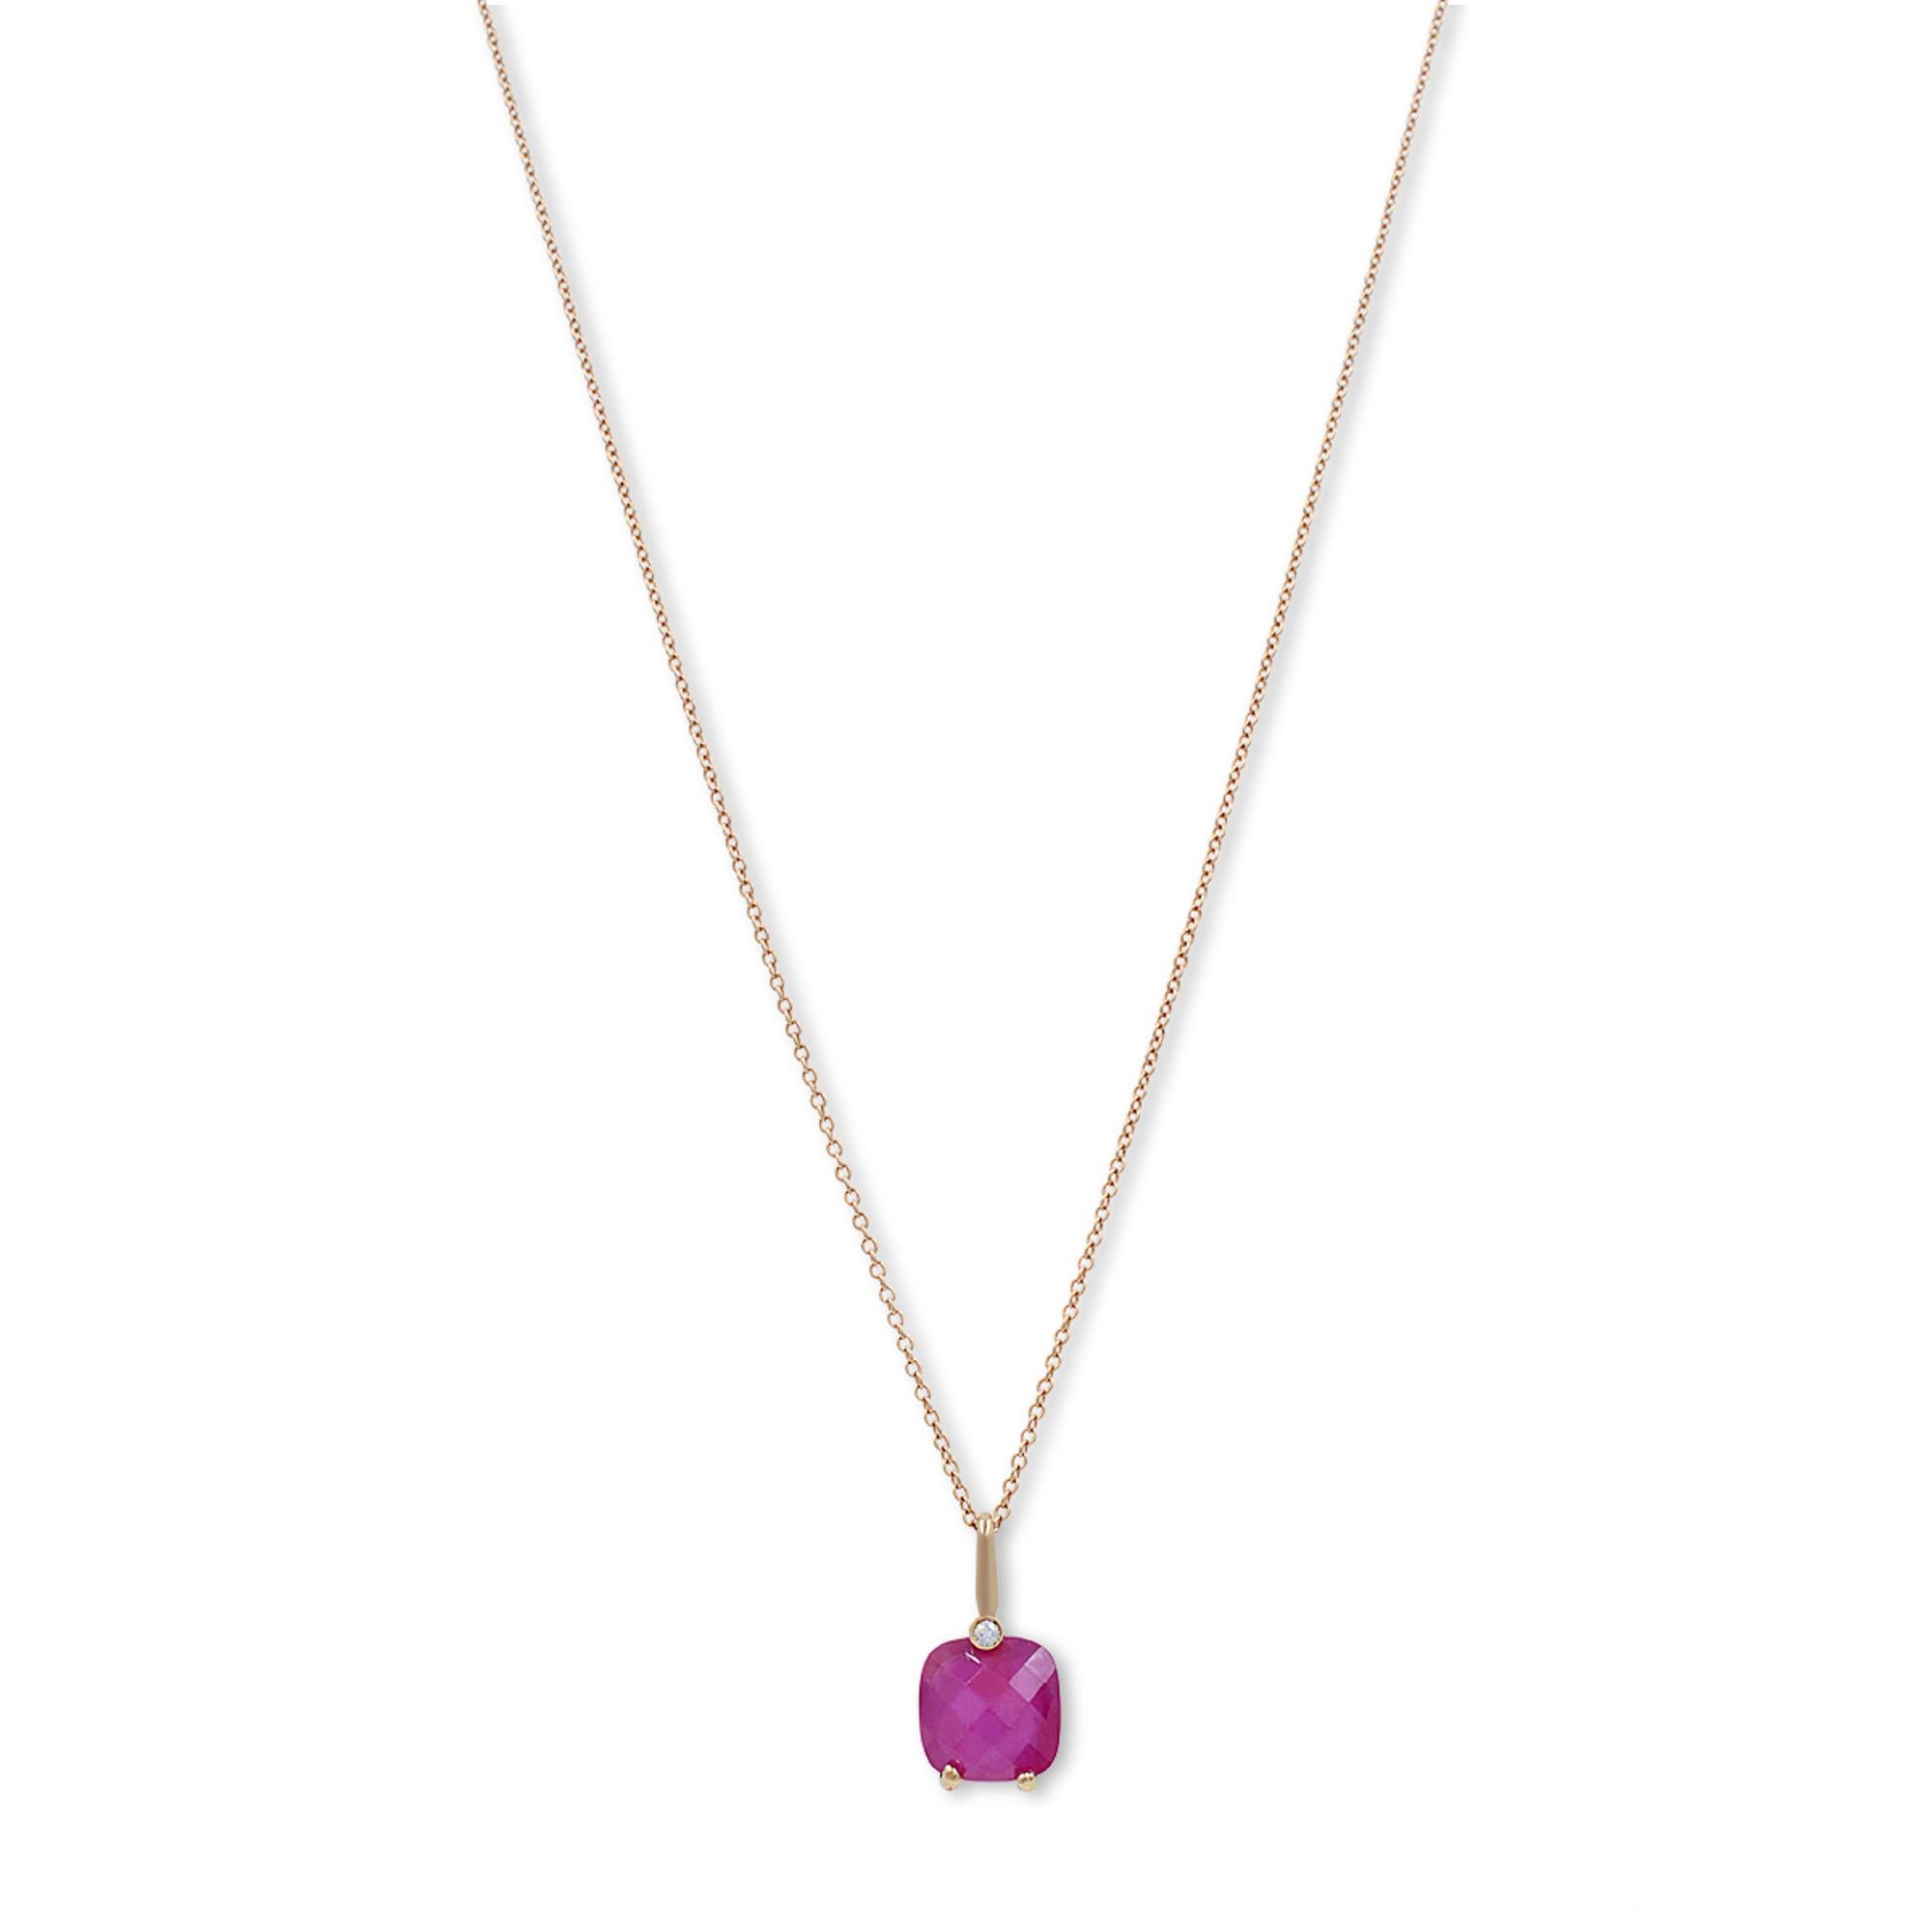 Beautiful and dainty, this rhodolite and diamond pendant necklace is crafted in fine 18k yellow gold. It features a square shaped rhodolite in two prong setting with a round bezel set diamond on the top. Chain length: 16 inches. Total weight: 4.6